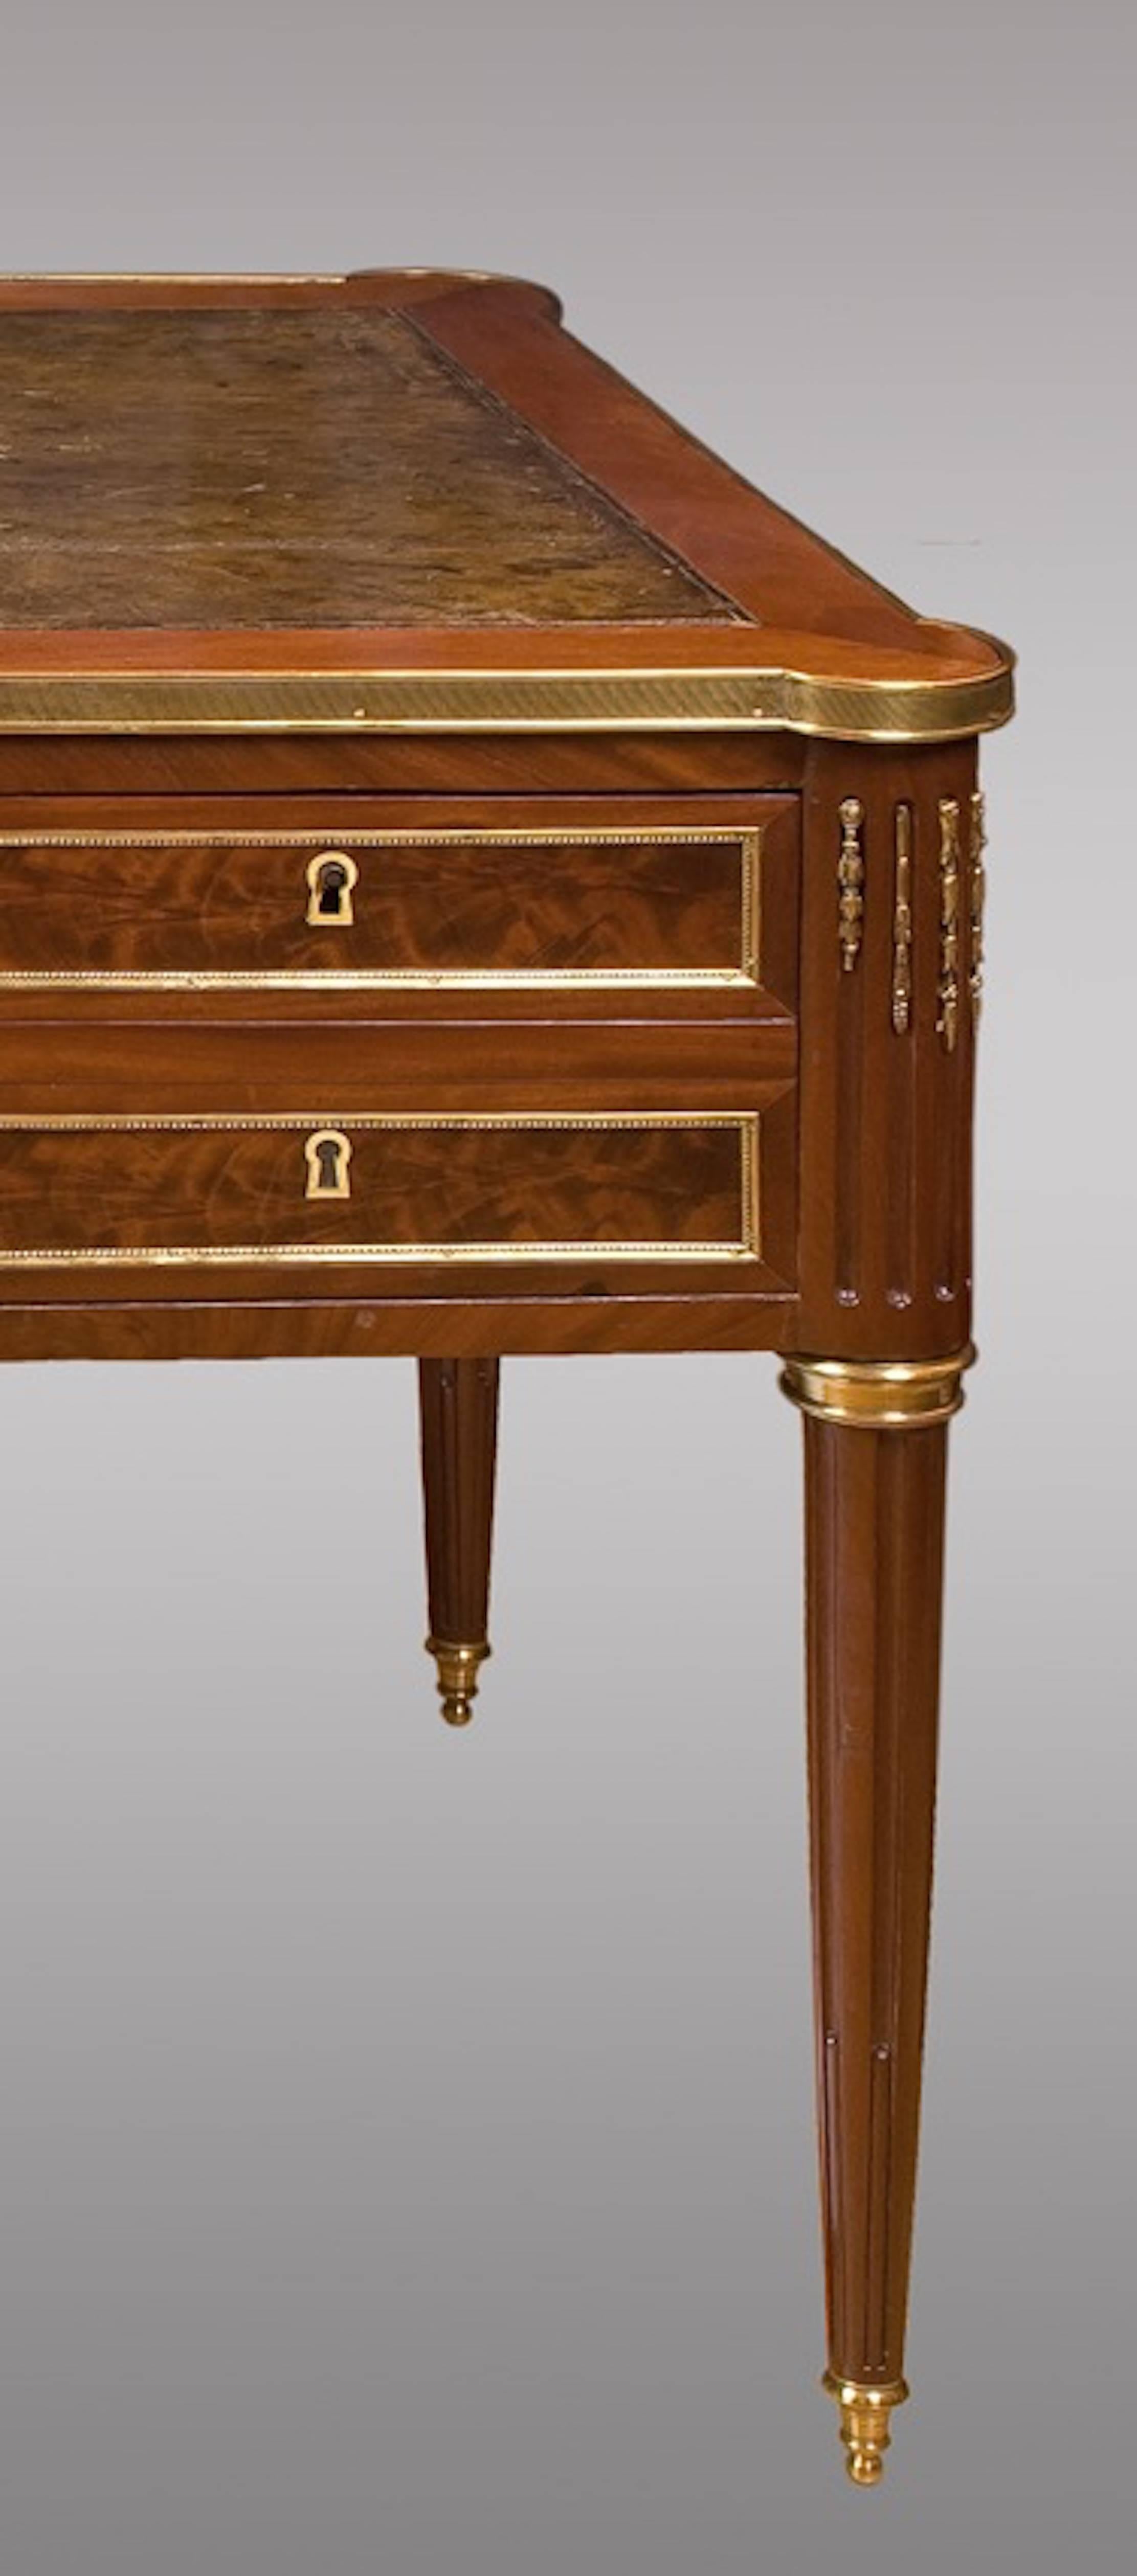 Louis XVI mahogany Bureau plat with ormolu-mounted
Four drawers in front and the back simulated.
Also removable trays on either side.
Desk and trays with old leather.

